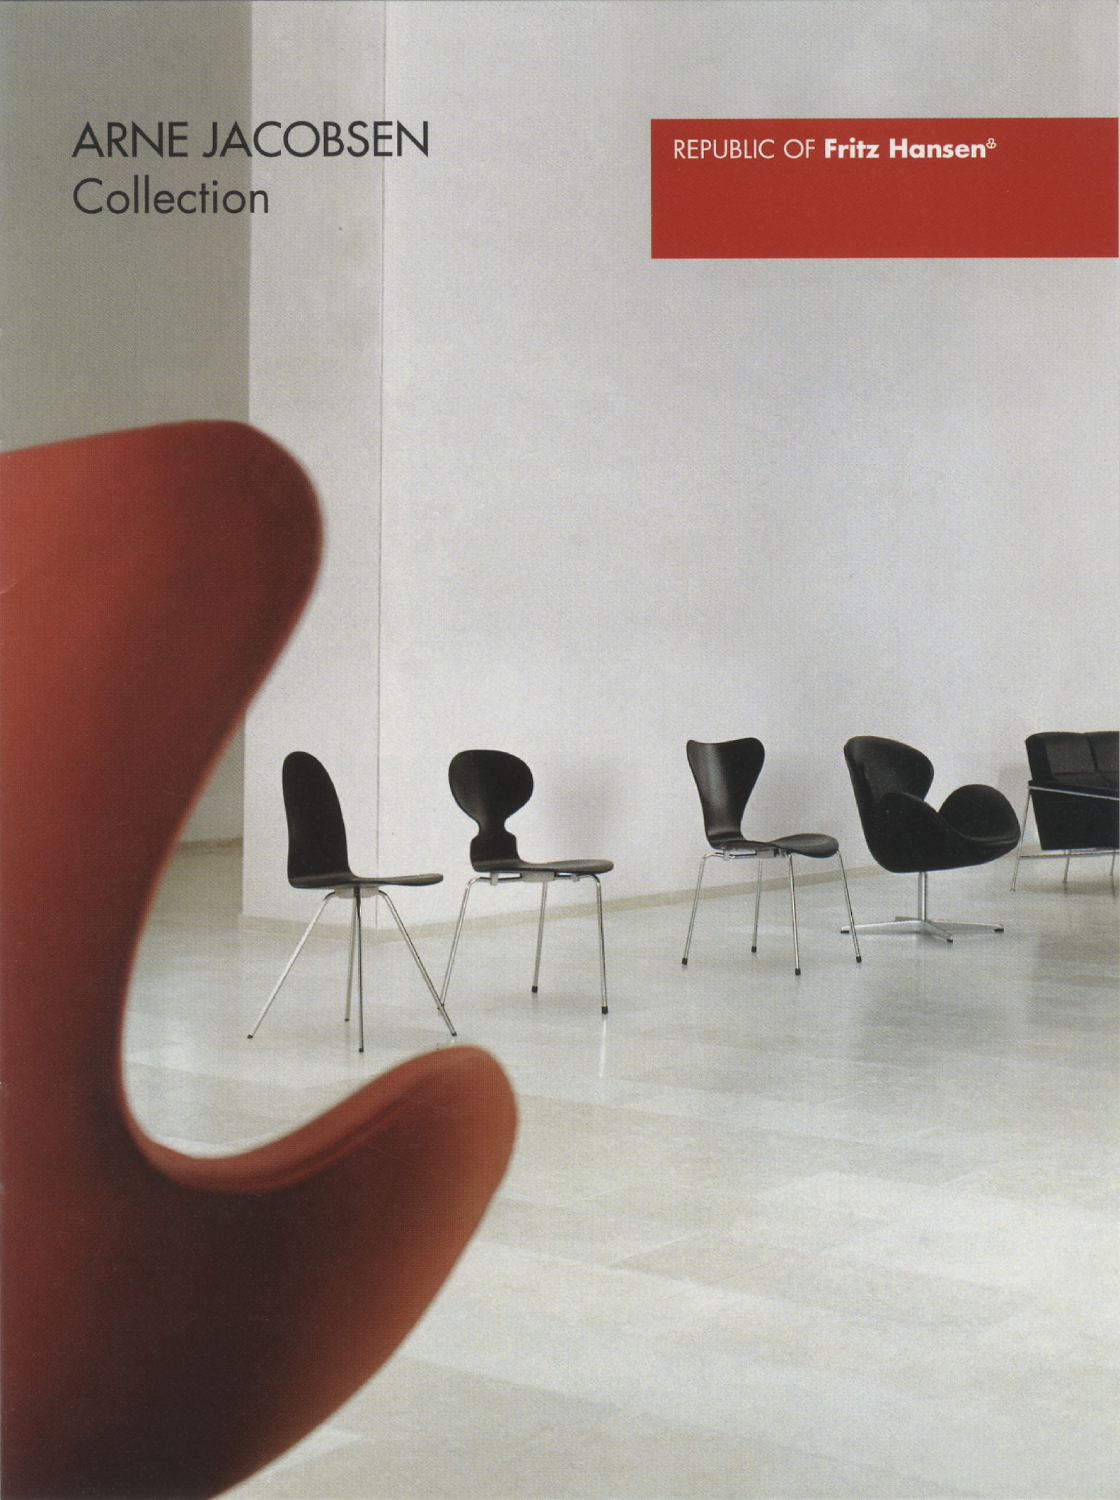 Arne Jacobsen: Grand Old Man of Modern Design and Architecture［image4］